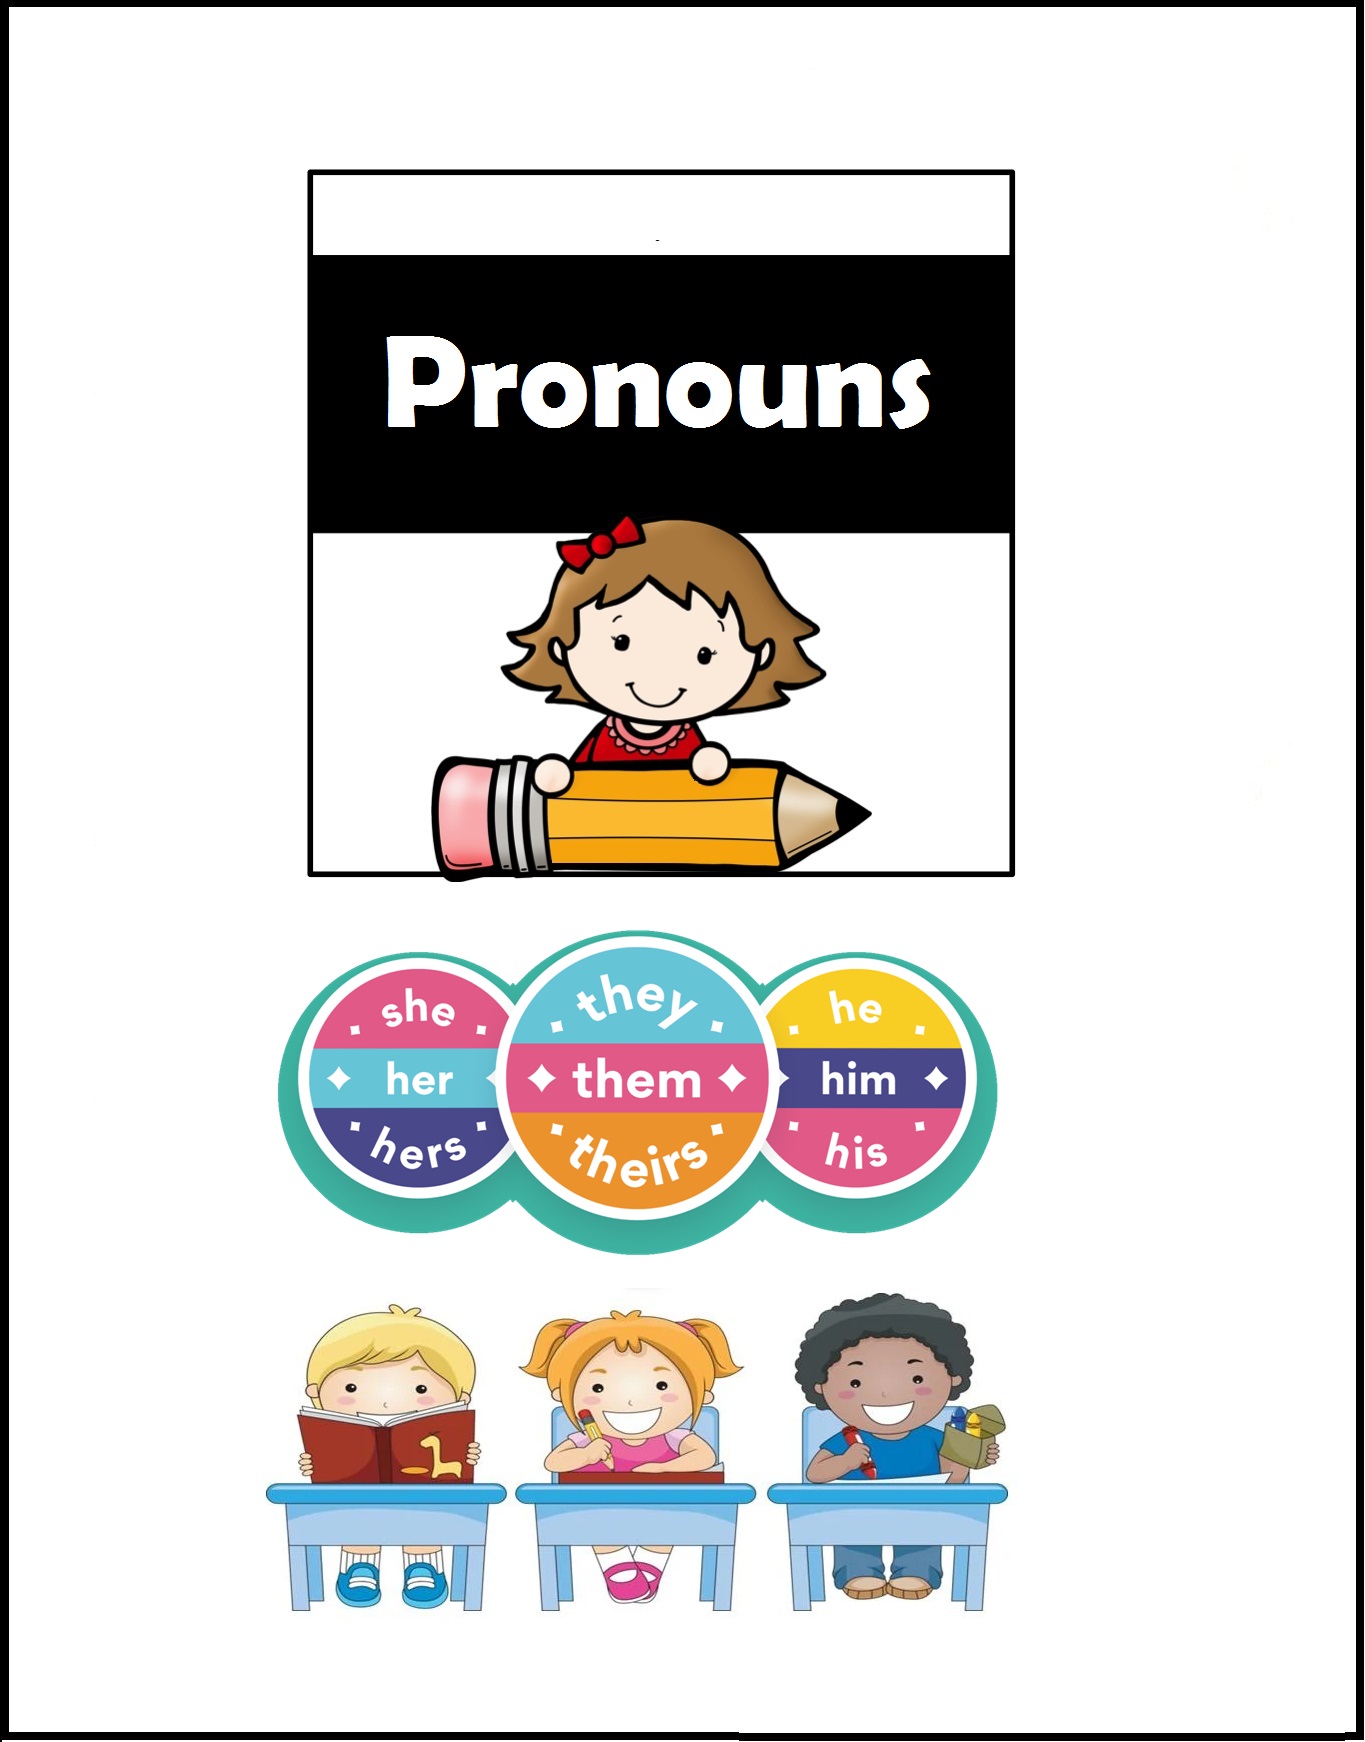 english-pronoun-learning-and-practice-worksheets